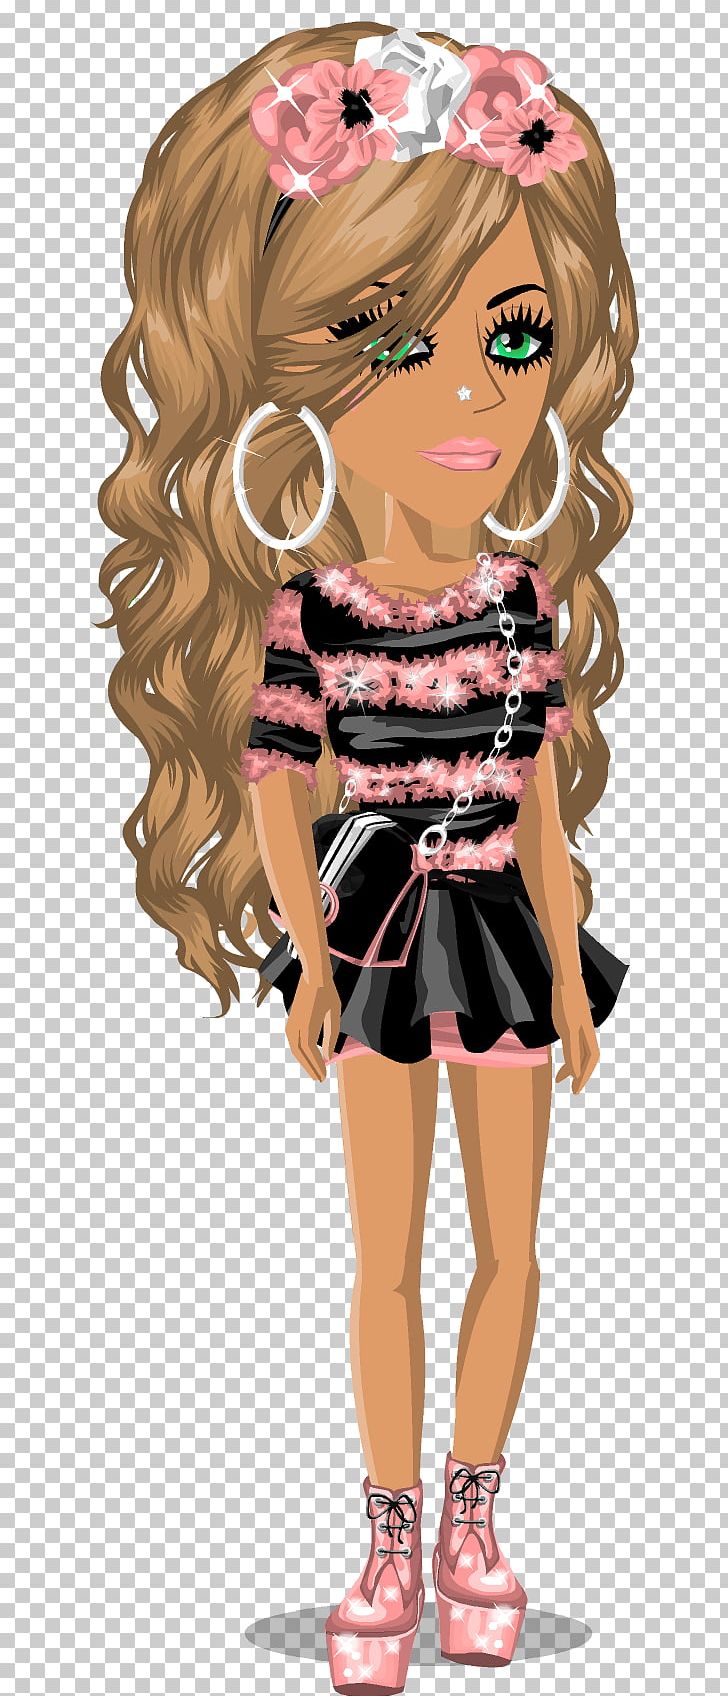 MovieStarPlanet Character Avatar Game PNG, Clipart, Anime, Avata, Barbie, Black Hair, Brown Hair Free PNG Download